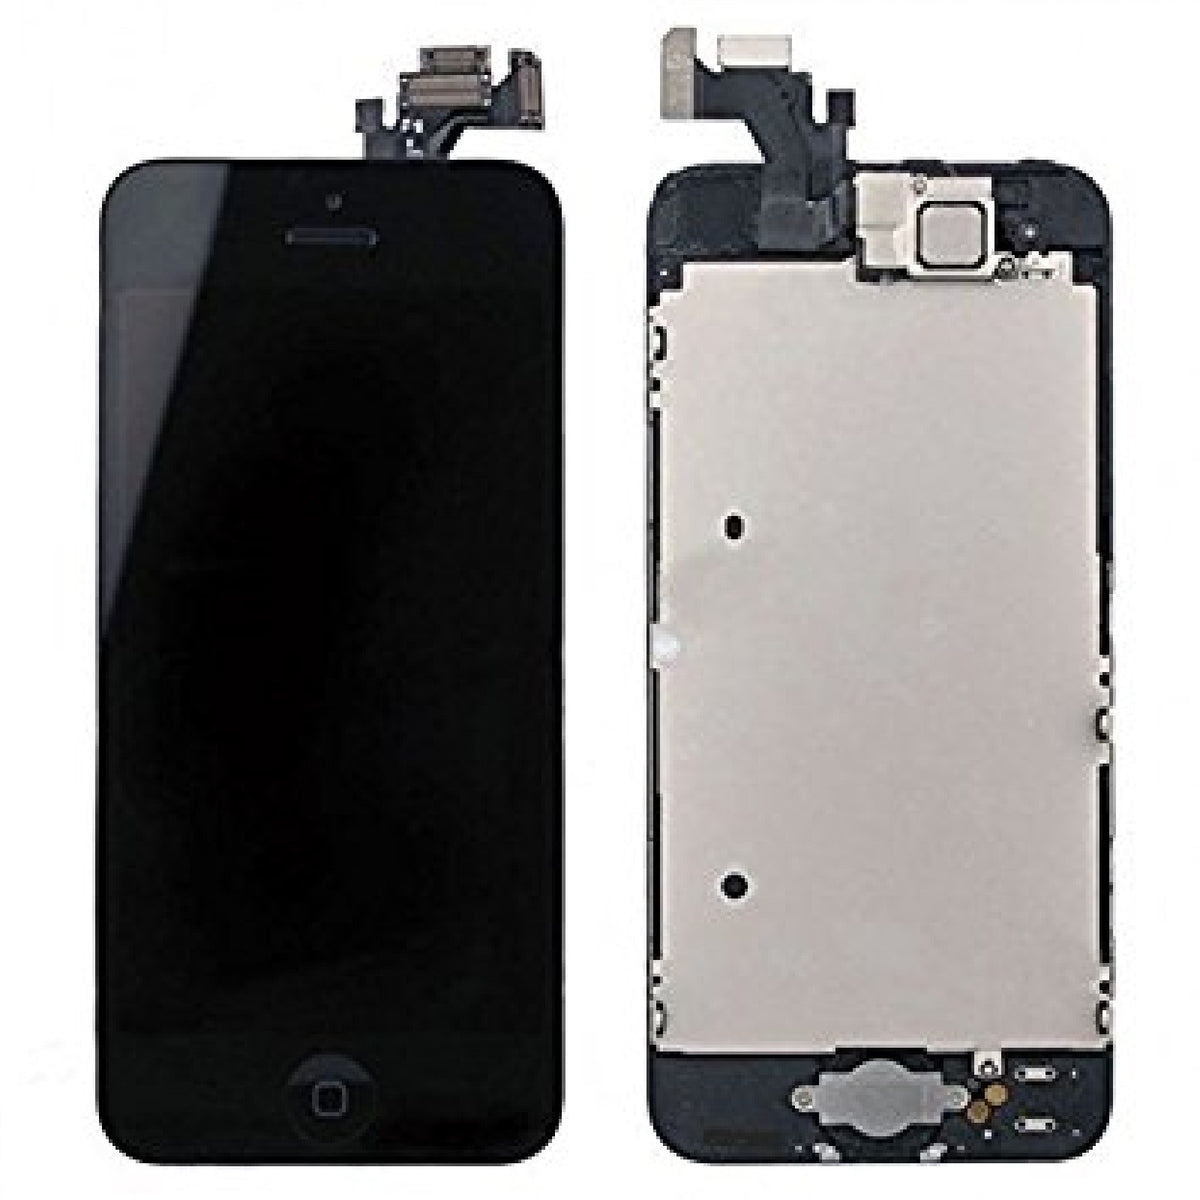 Front Camera Earpiece Speaker Mid Board+ Home Button Small Parts LLLccorp OEM for iPhone 5 5G LCD Replacement Complete Front Housing LCD Display Touch Screen Digitizer Assembly Black